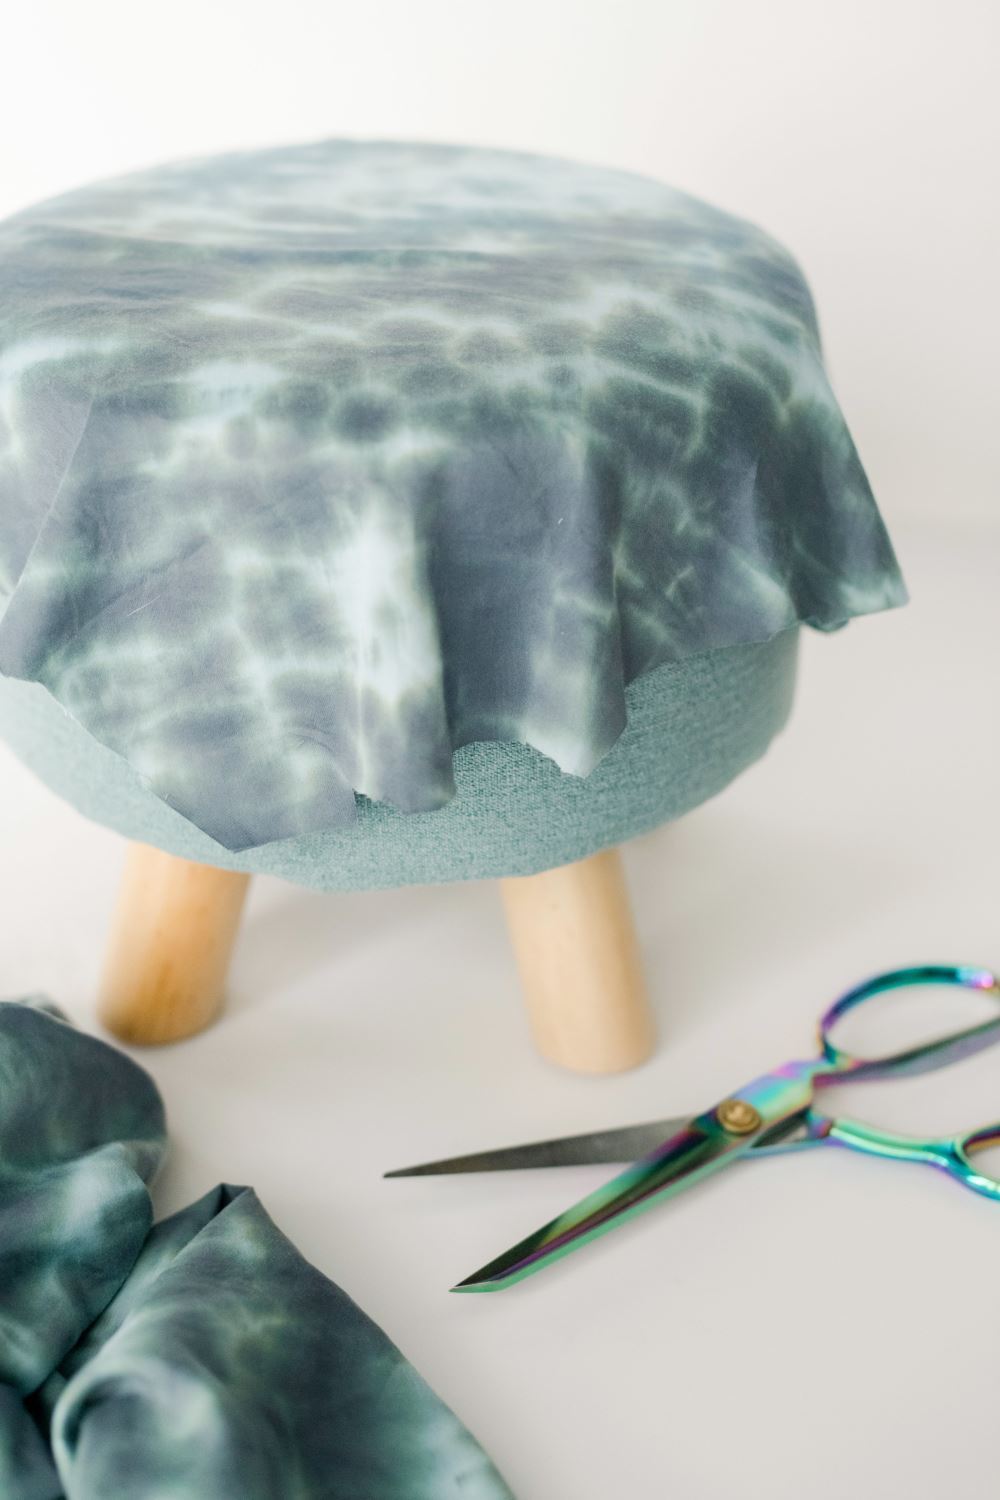 Wrap and glue fabric onto top of stool.